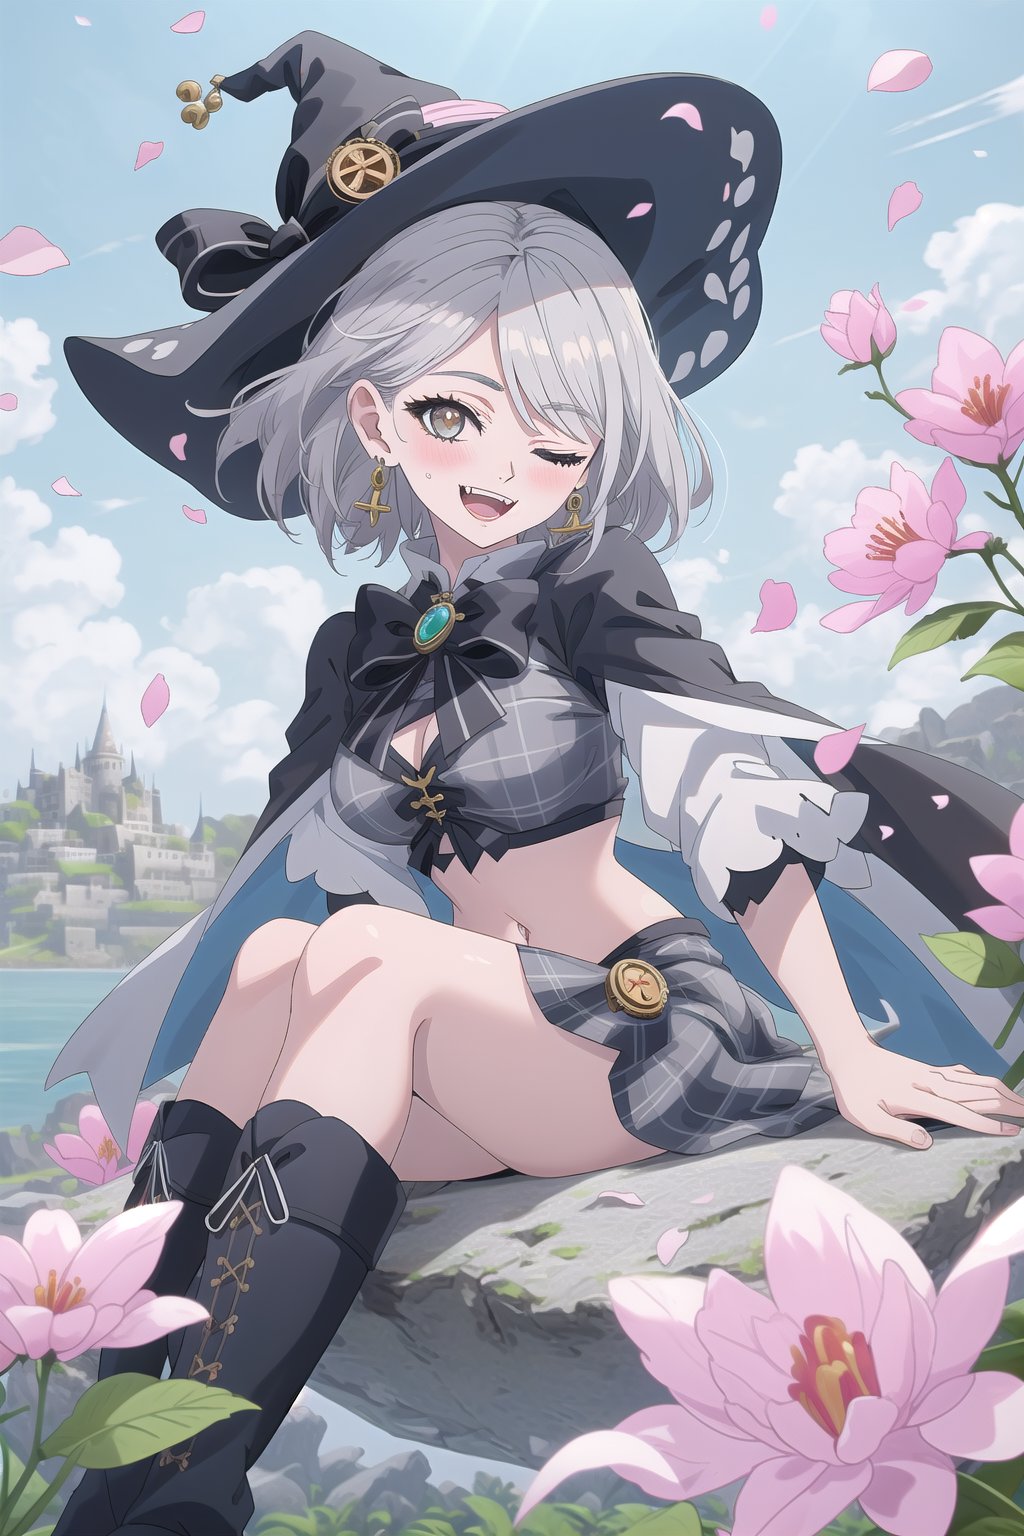 nier anime style illustration, best quality, masterpiece High resolution, good detail, bright colors, HDR, 4K. Dolby vision high.

Witch with short straight silver hair, white eyes (one eye closed), silver earrings, blushing 

Elegant steampunk gray crop top 

black bow 

Showing navel, exposed navel 

Gray plaid school skirt 

black stockings

Elegant steampunk white boots

a white cape 

On a floating island in the blue sky 

Sitting on the island

Many flowers

Very windy with petals flying

(A hand on one's own face) 

Coquettish smile (proud smile). Happy, excited. Open mouth 

Showing fangs, exposed fangs 

Selfie

White witch hat
